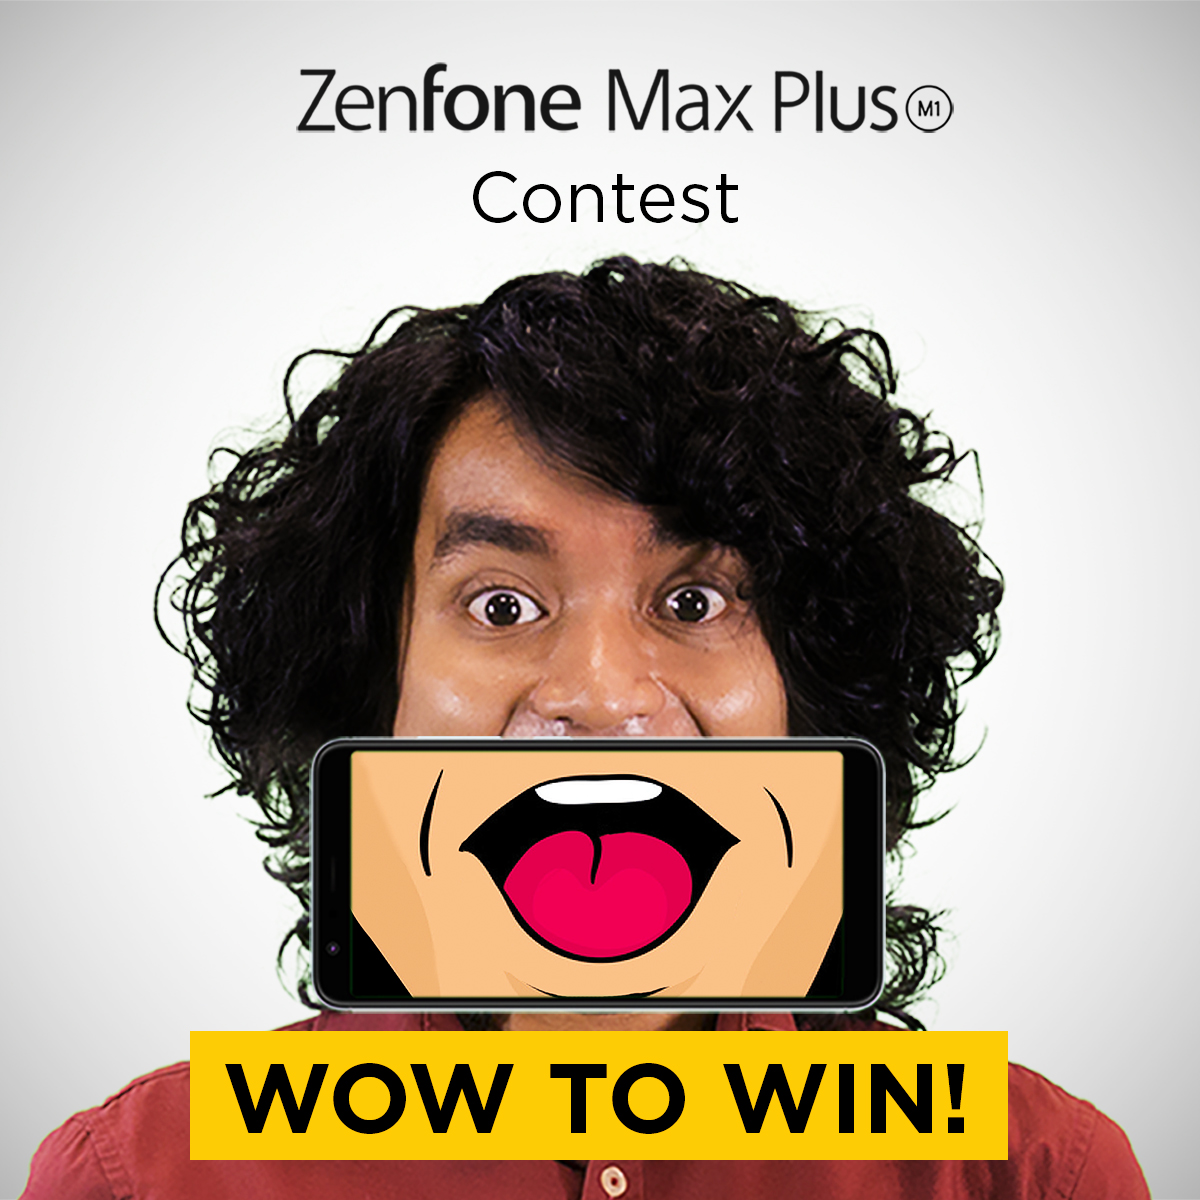 Win a free ASUS ZenFone Max Plus from ASUS Malaysia's online contest